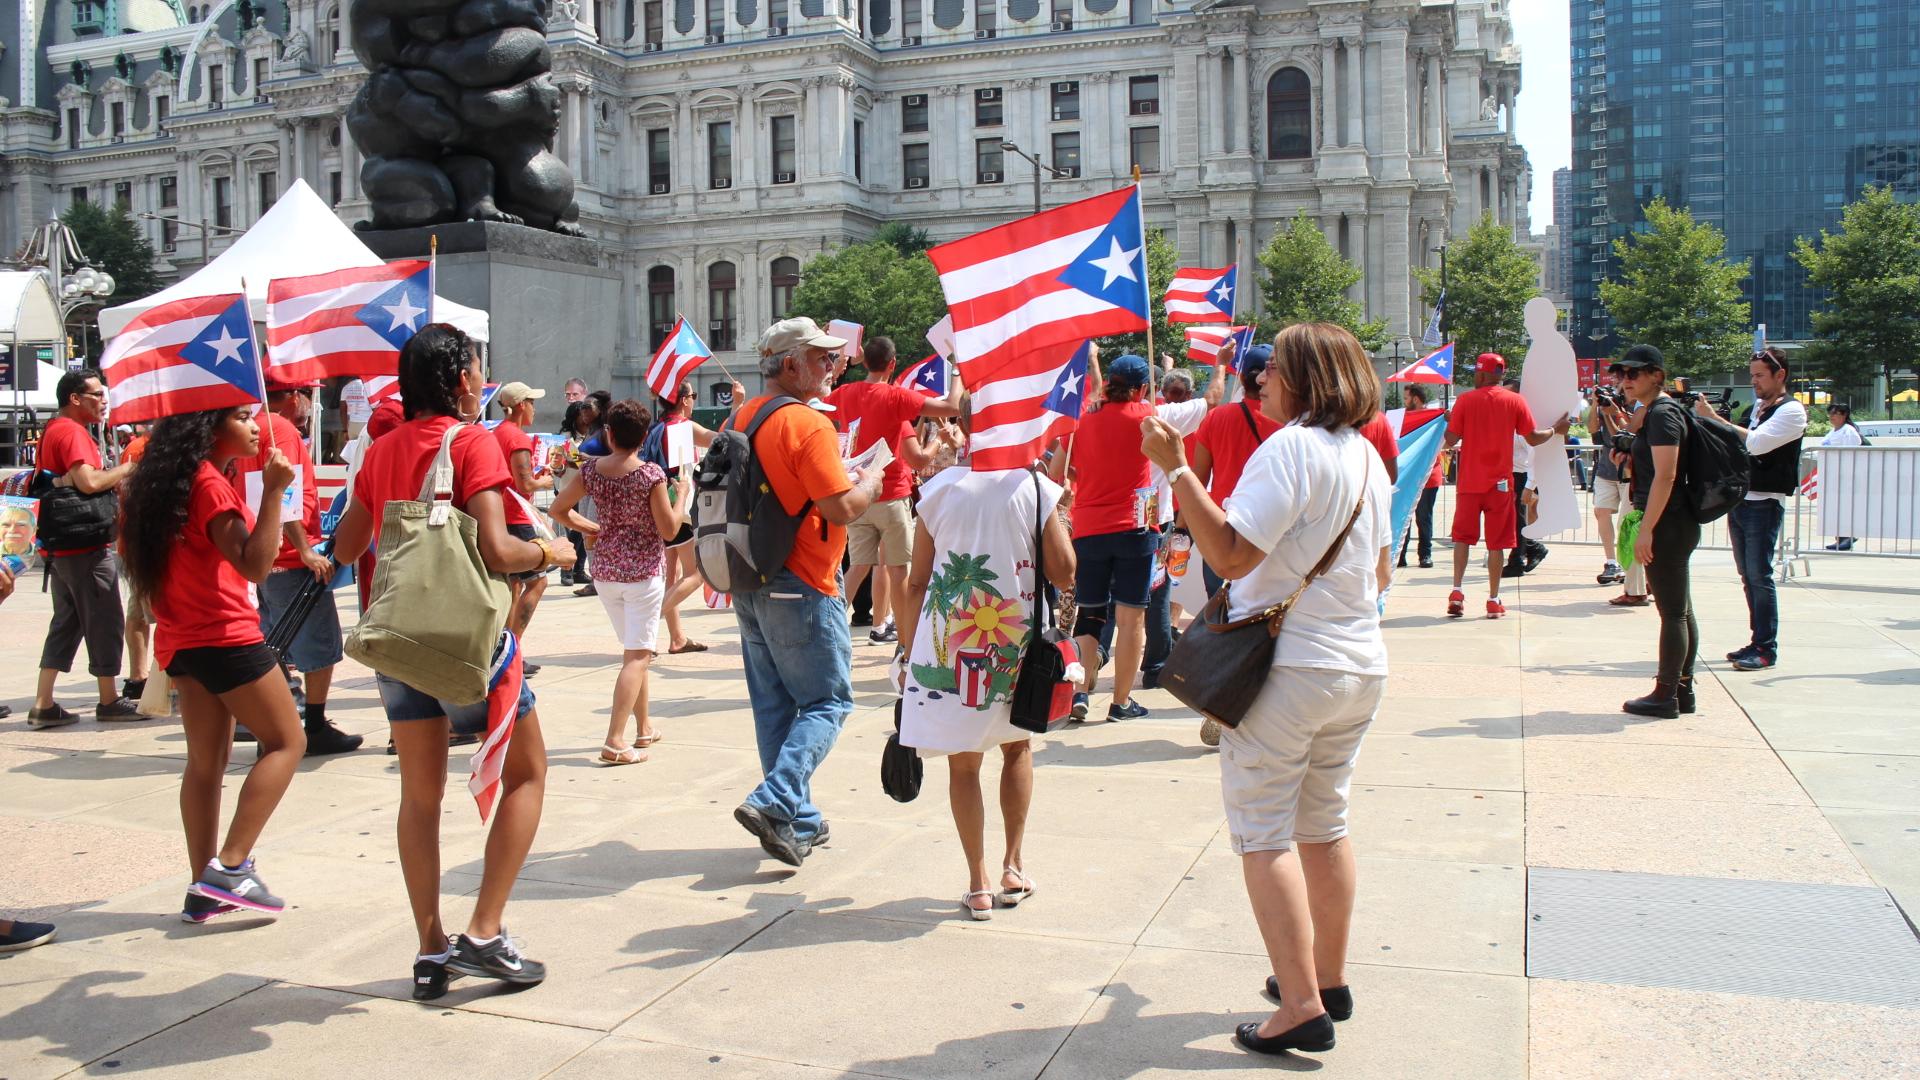 Puerto Ricans from across the country march near Philadelphia's city hall during the Democratic National Convention, July 25, 2016.